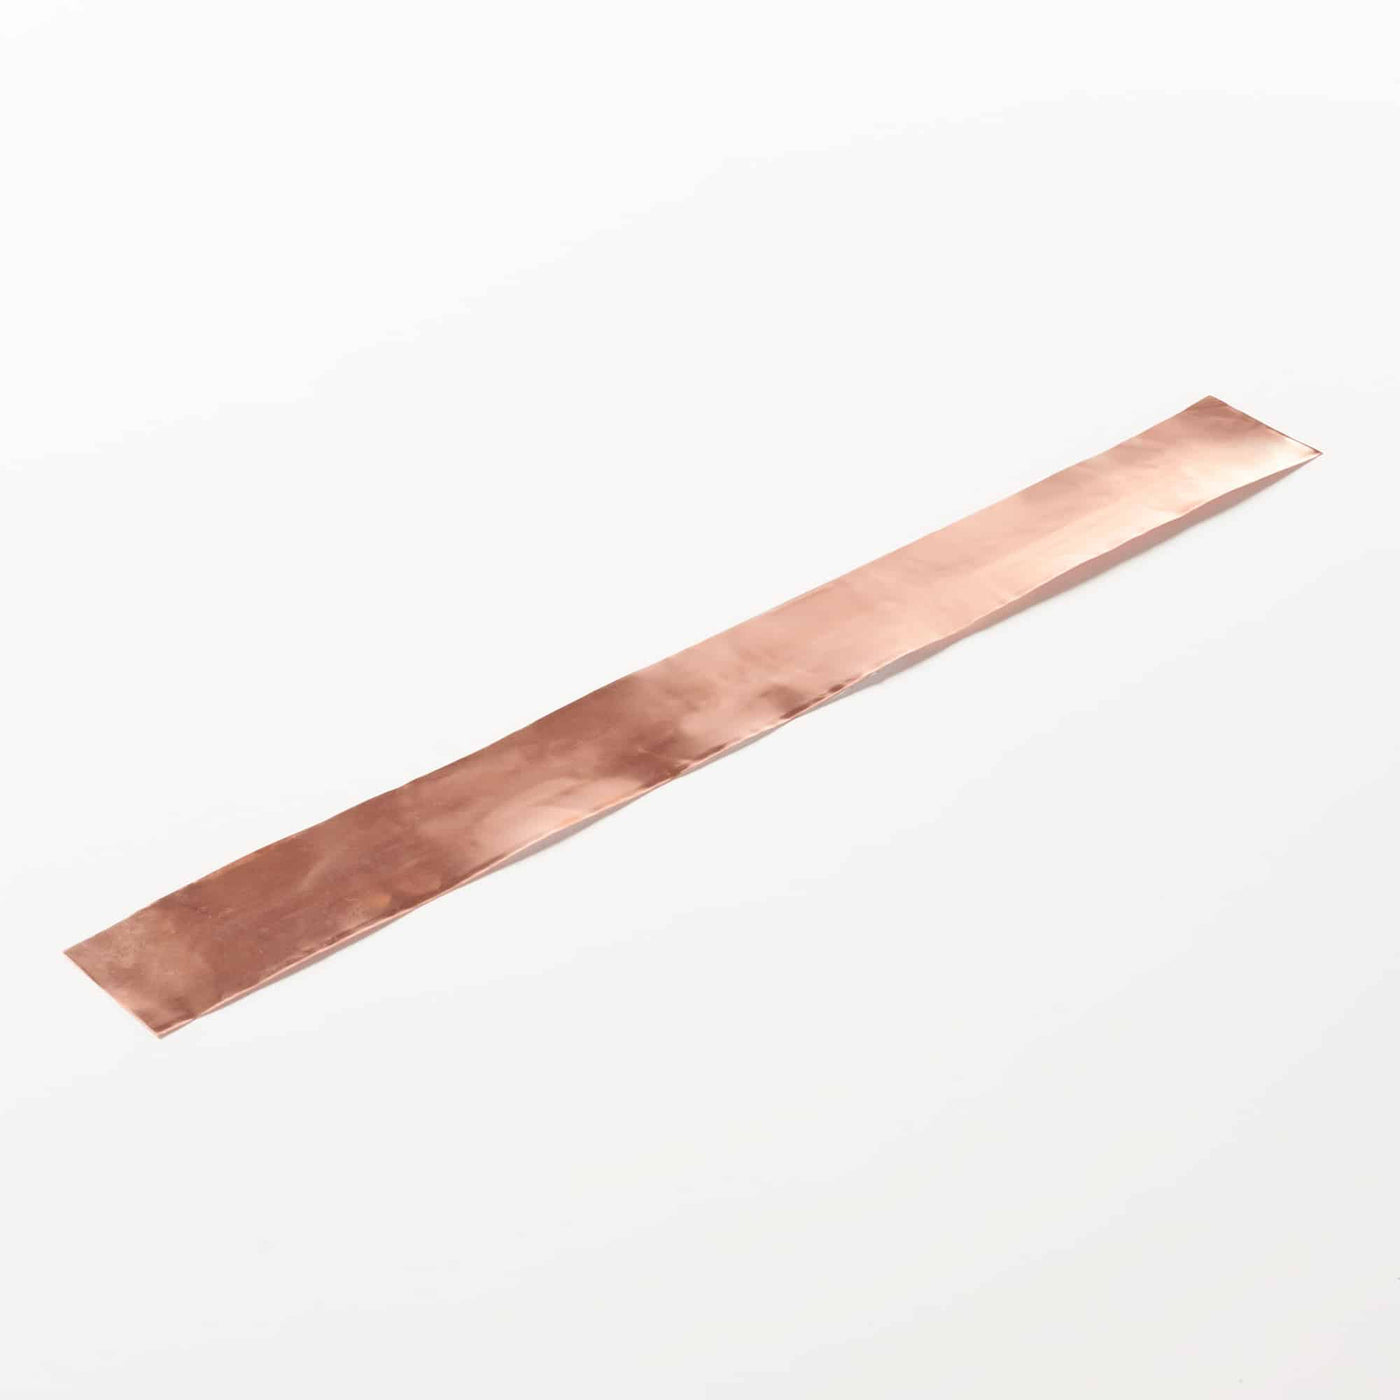 Photo of a copper strip against a white background.